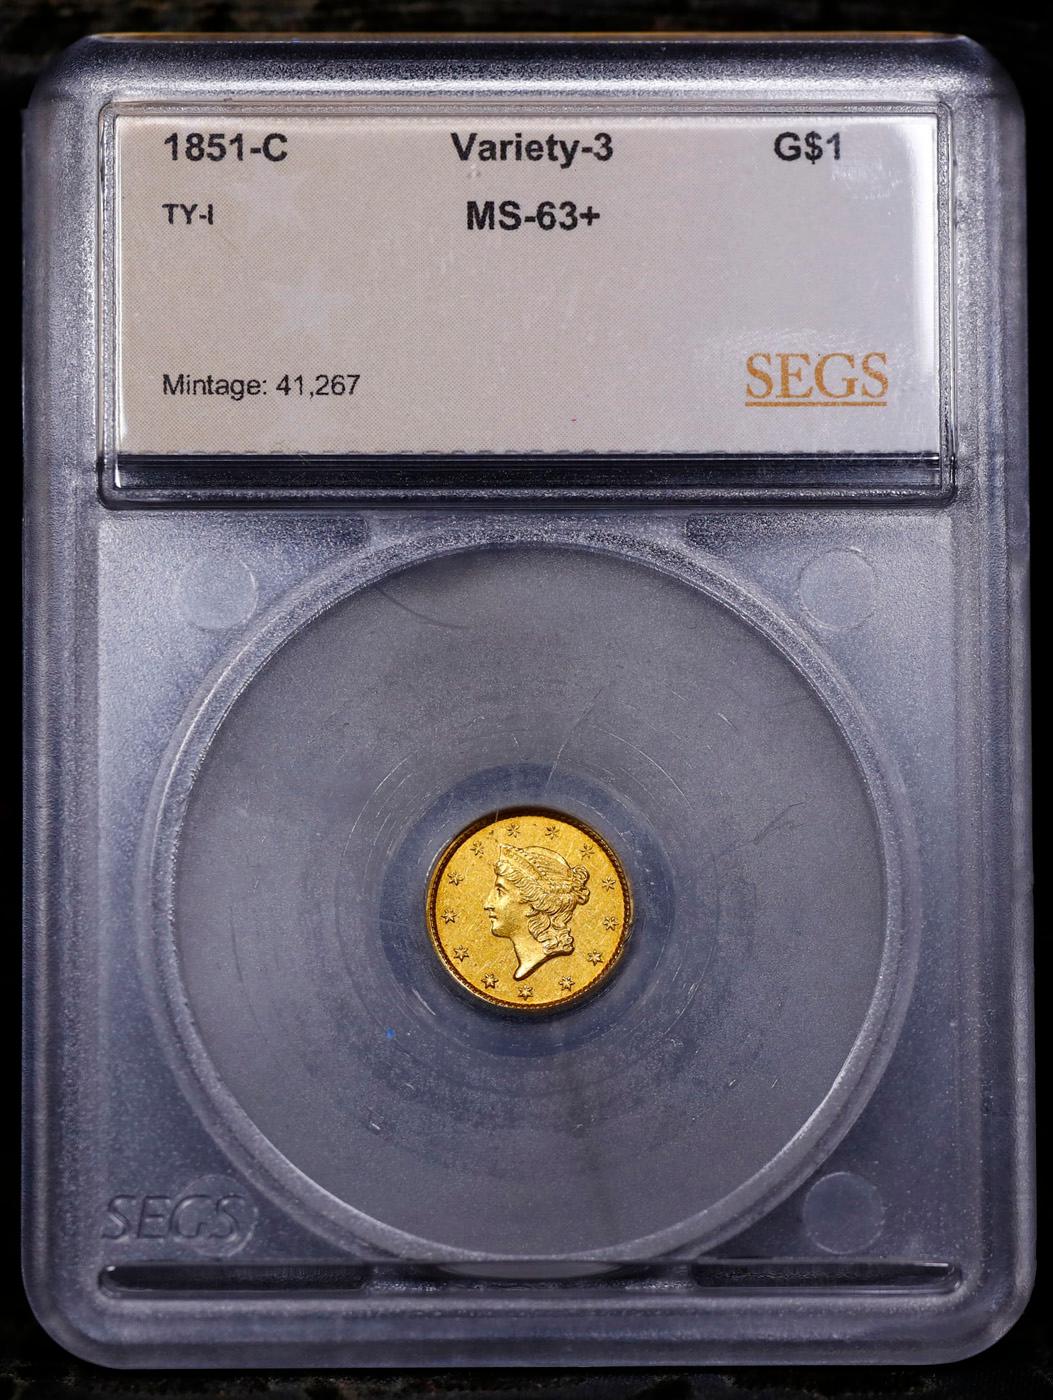 ***Auction Highlight*** 1851-c Gold Dollar TY-I Charlotte Variety-3 1 Graded ms63+ BY SEGS (fc)